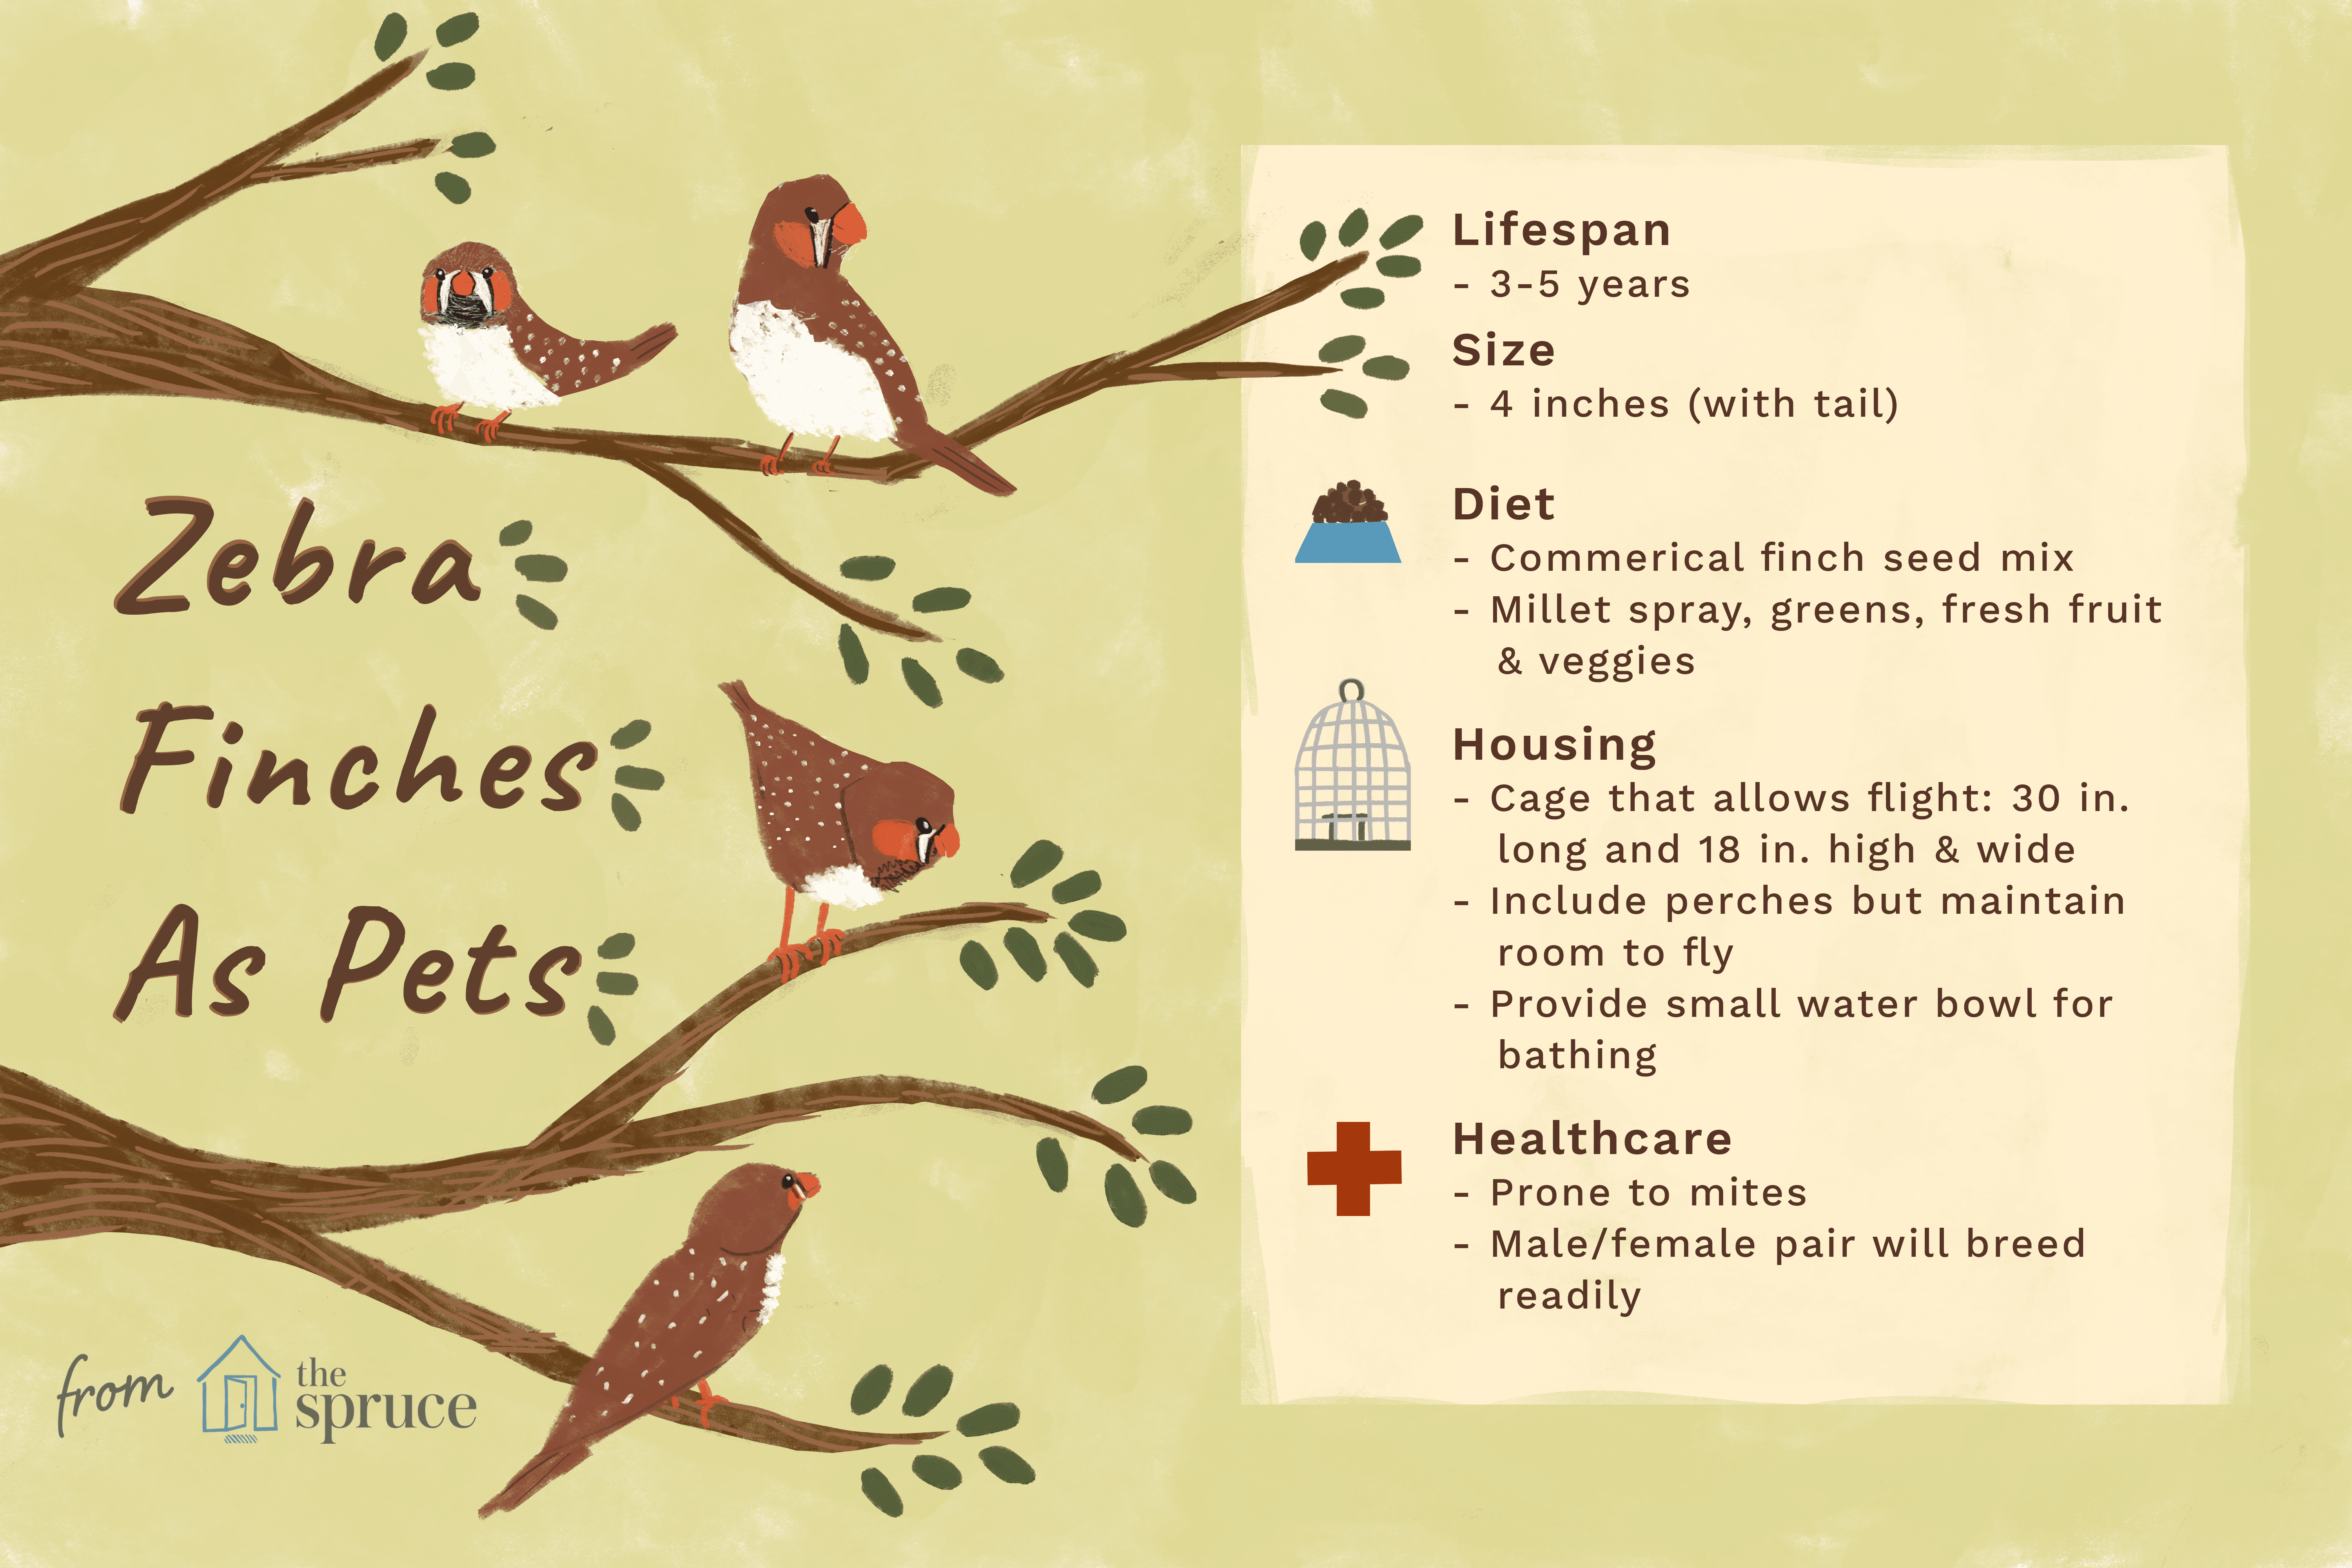 zebra finches as pets: care sheet